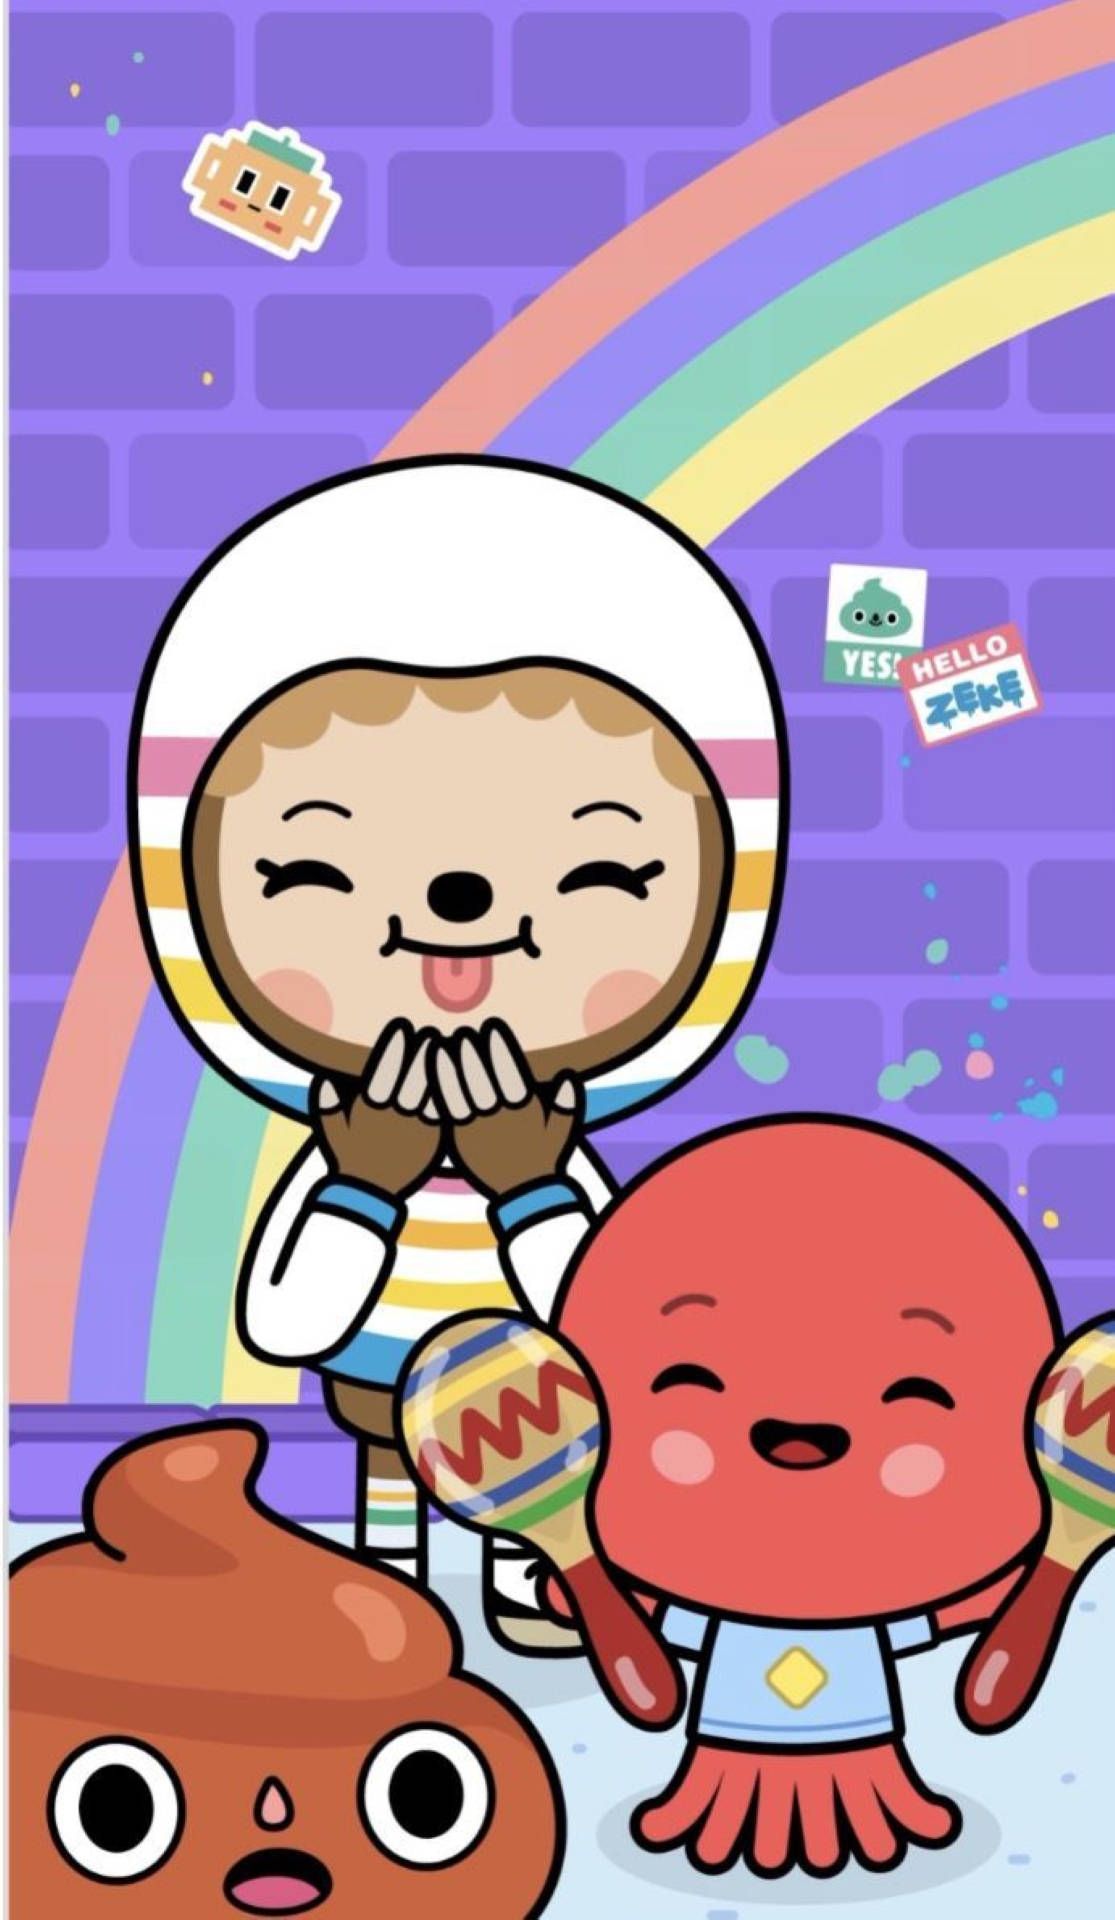 Cartoon wallpaper of a character in a spacesuit with two other characters. - Toca Boca